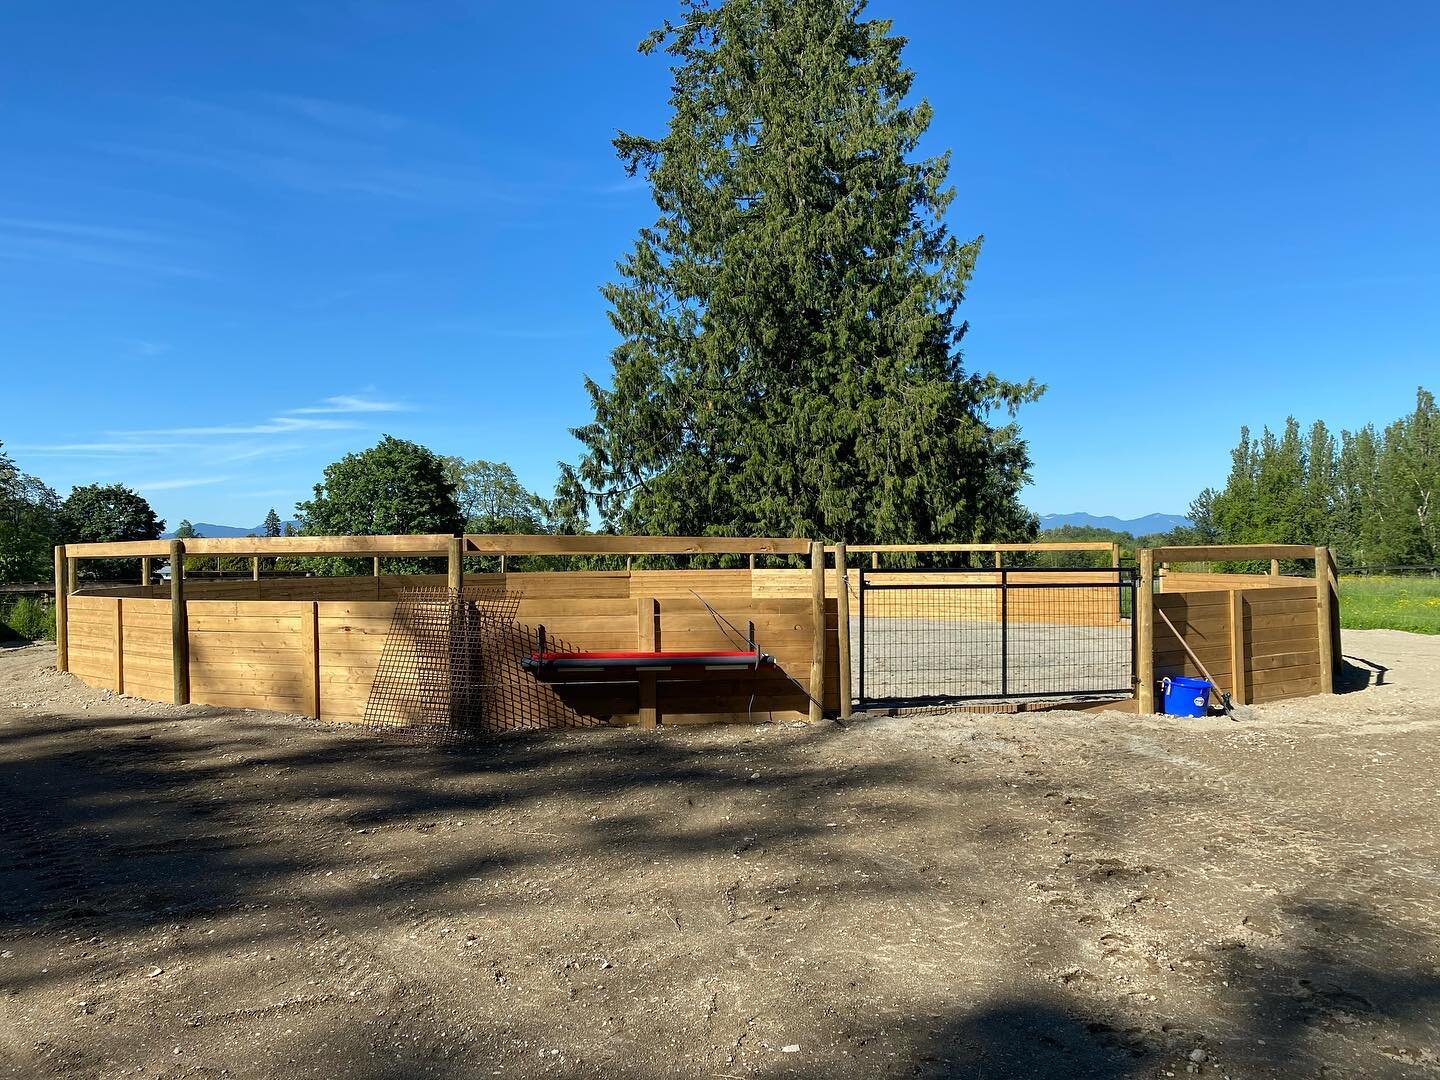 The weather can&rsquo;t make up its mind today, but we&rsquo;re sure enjoying the sun when it peeks out and our beautiful new round pen (built by the ever incredible Wayne &amp; Cody!!). If you haven&rsquo;t seen it yet be sure to check out the top n